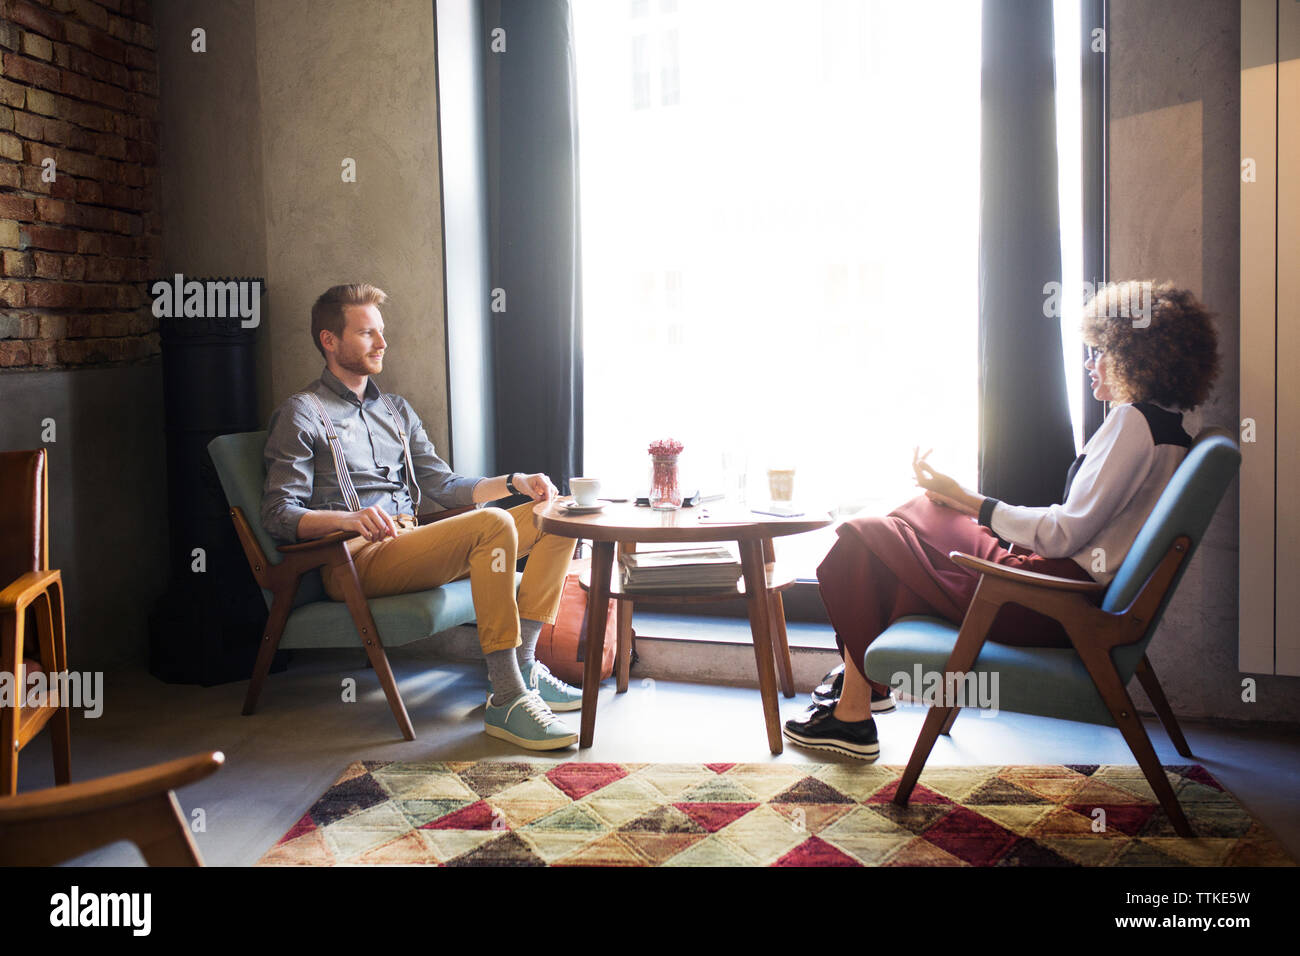 Business colleagues discussing by window at hotel lobby Stock Photo